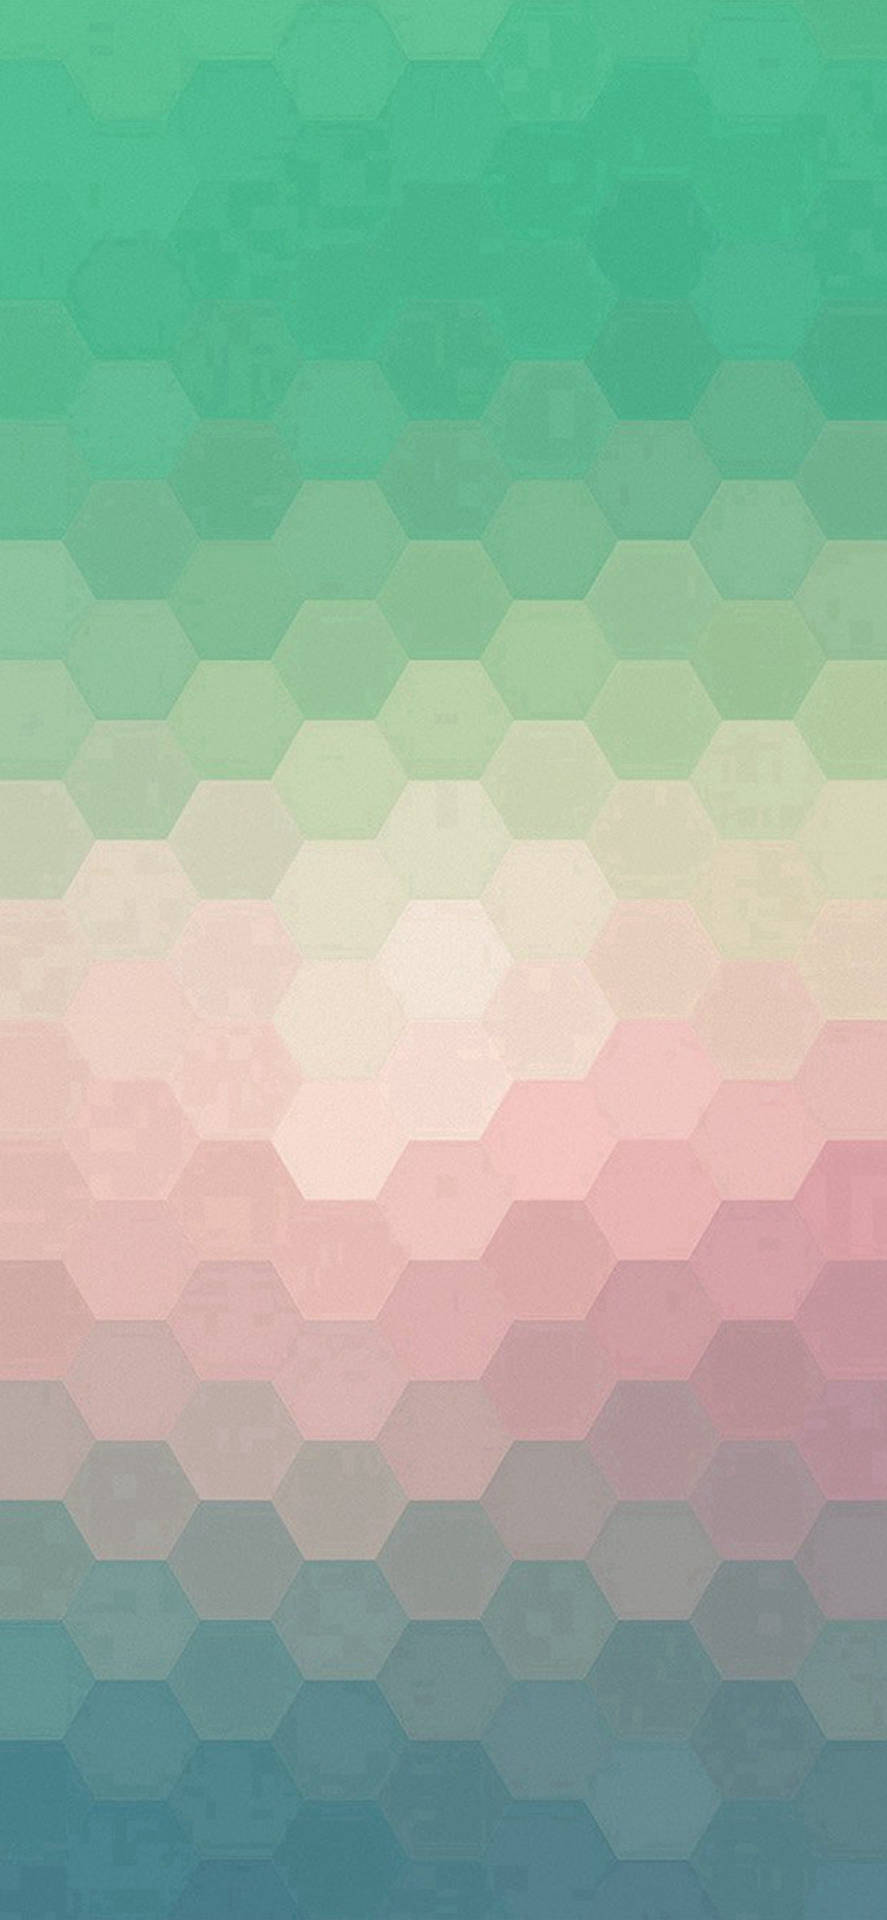 Colorful Geometric Patterns Cool Android